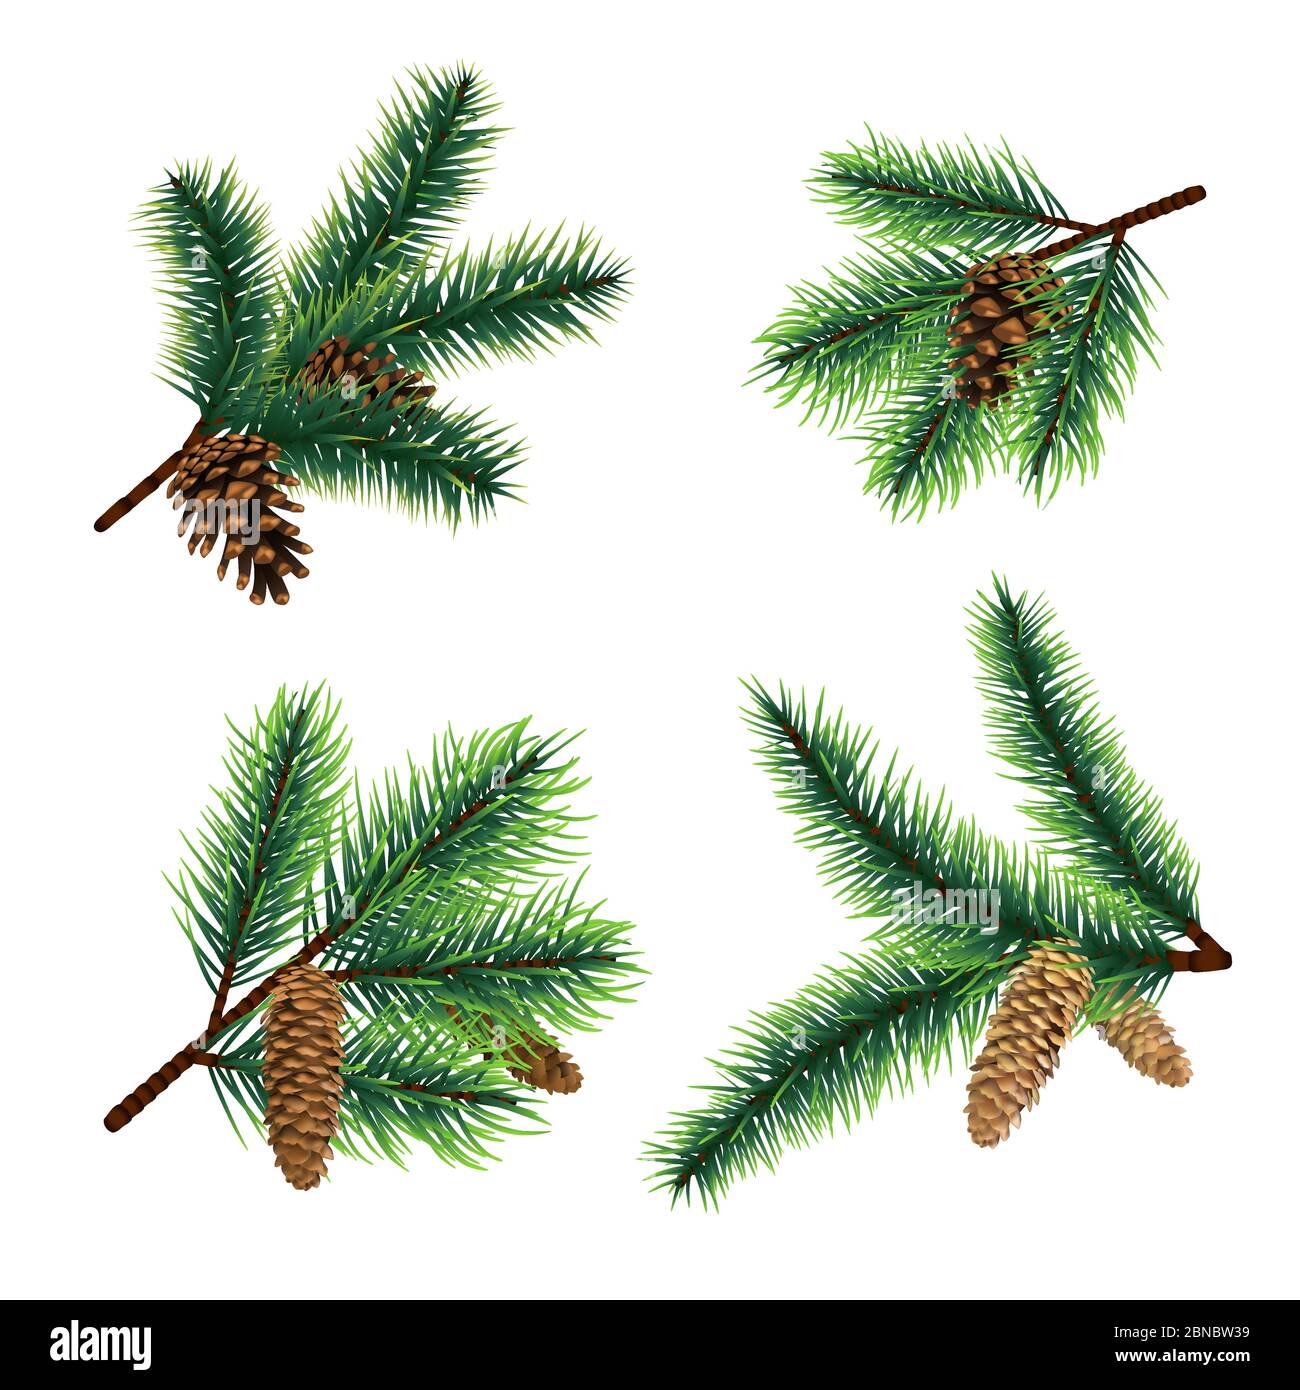 Fir branch. christmas tree branches with cones. Pine xmas vector decoration. Illustration of fir-cone decor, fir-tree needle Stock Vector